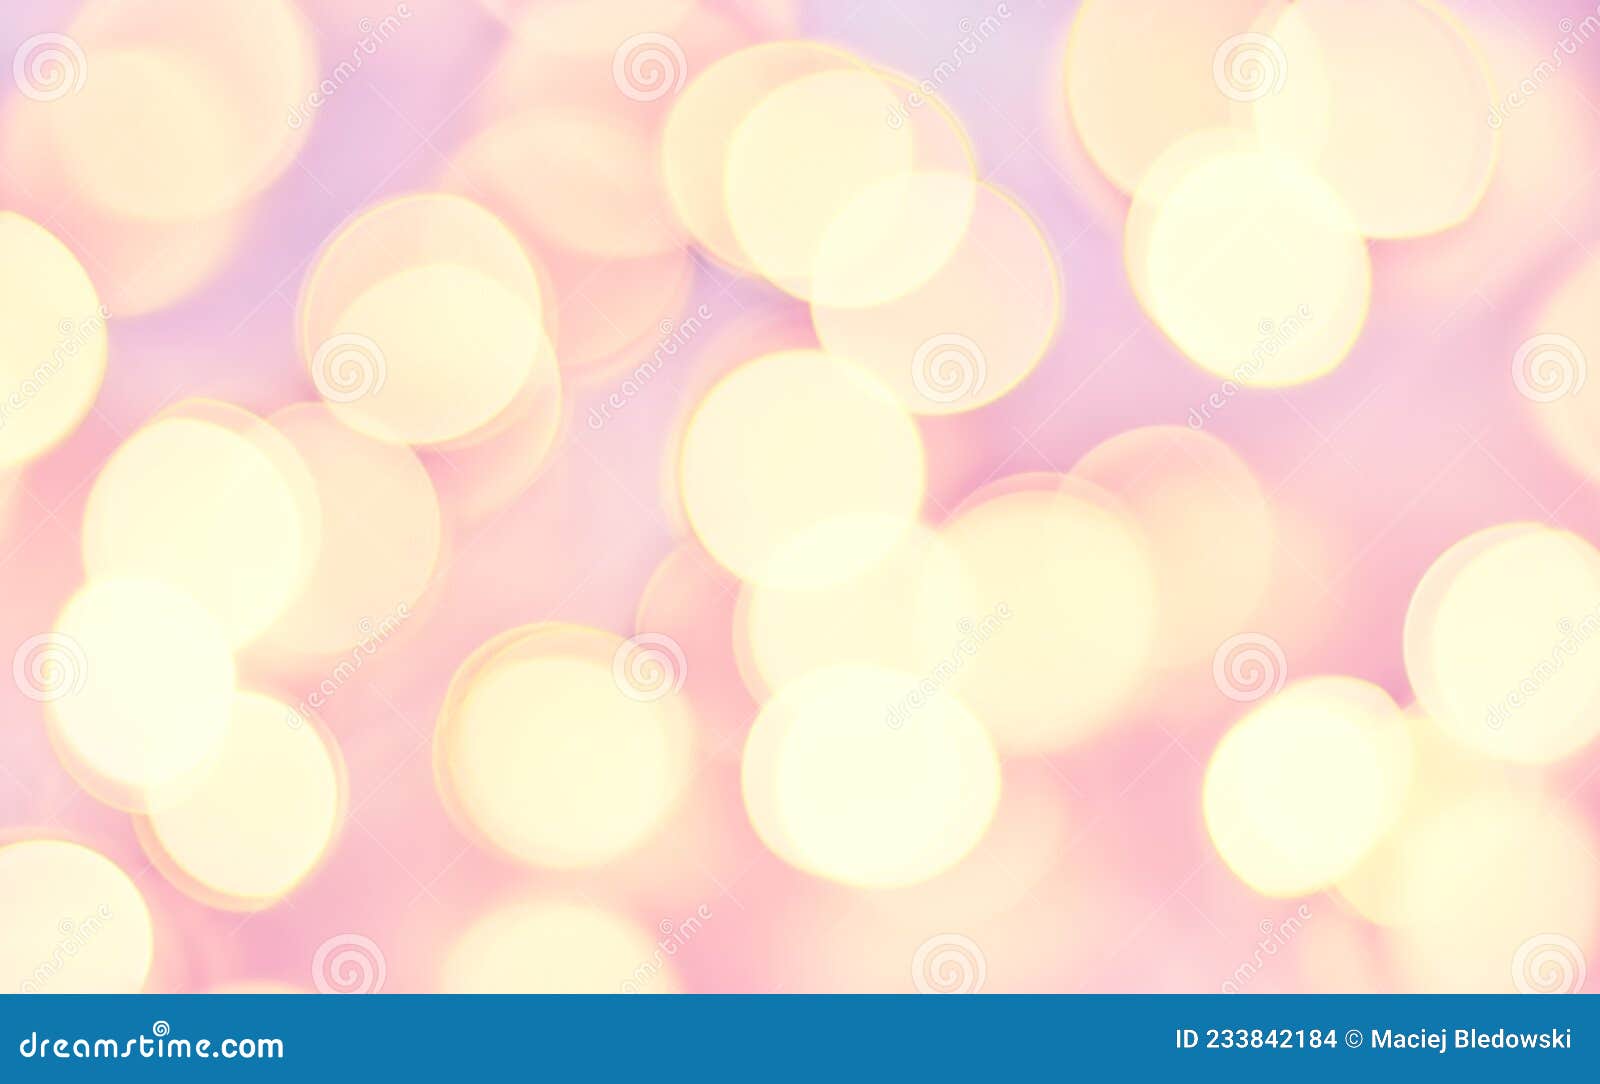 Blurred Picture of Lights, Abstract Party Background Stock Photo ...